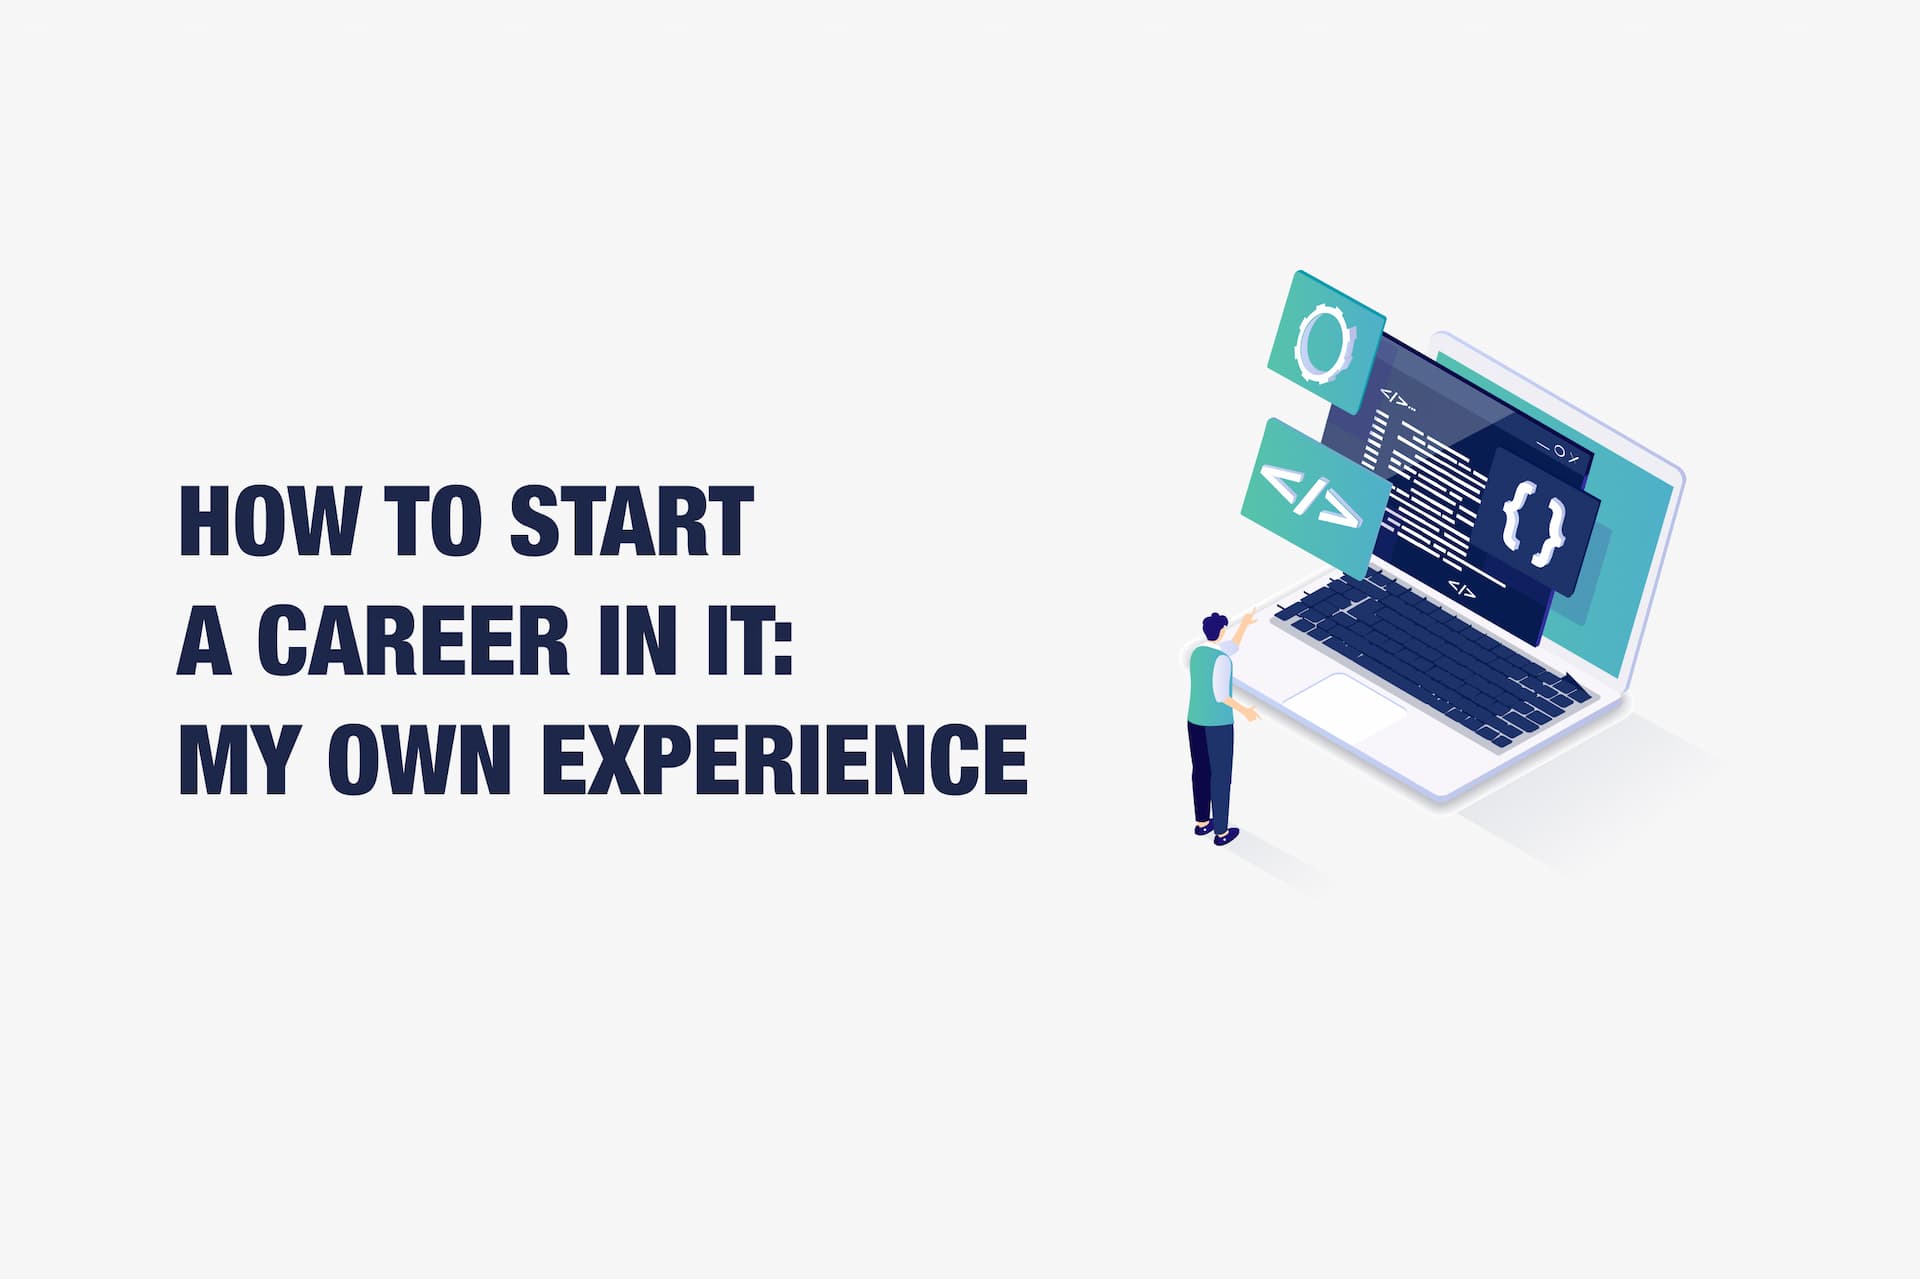 How To Start a Career in IT: My Own Experience